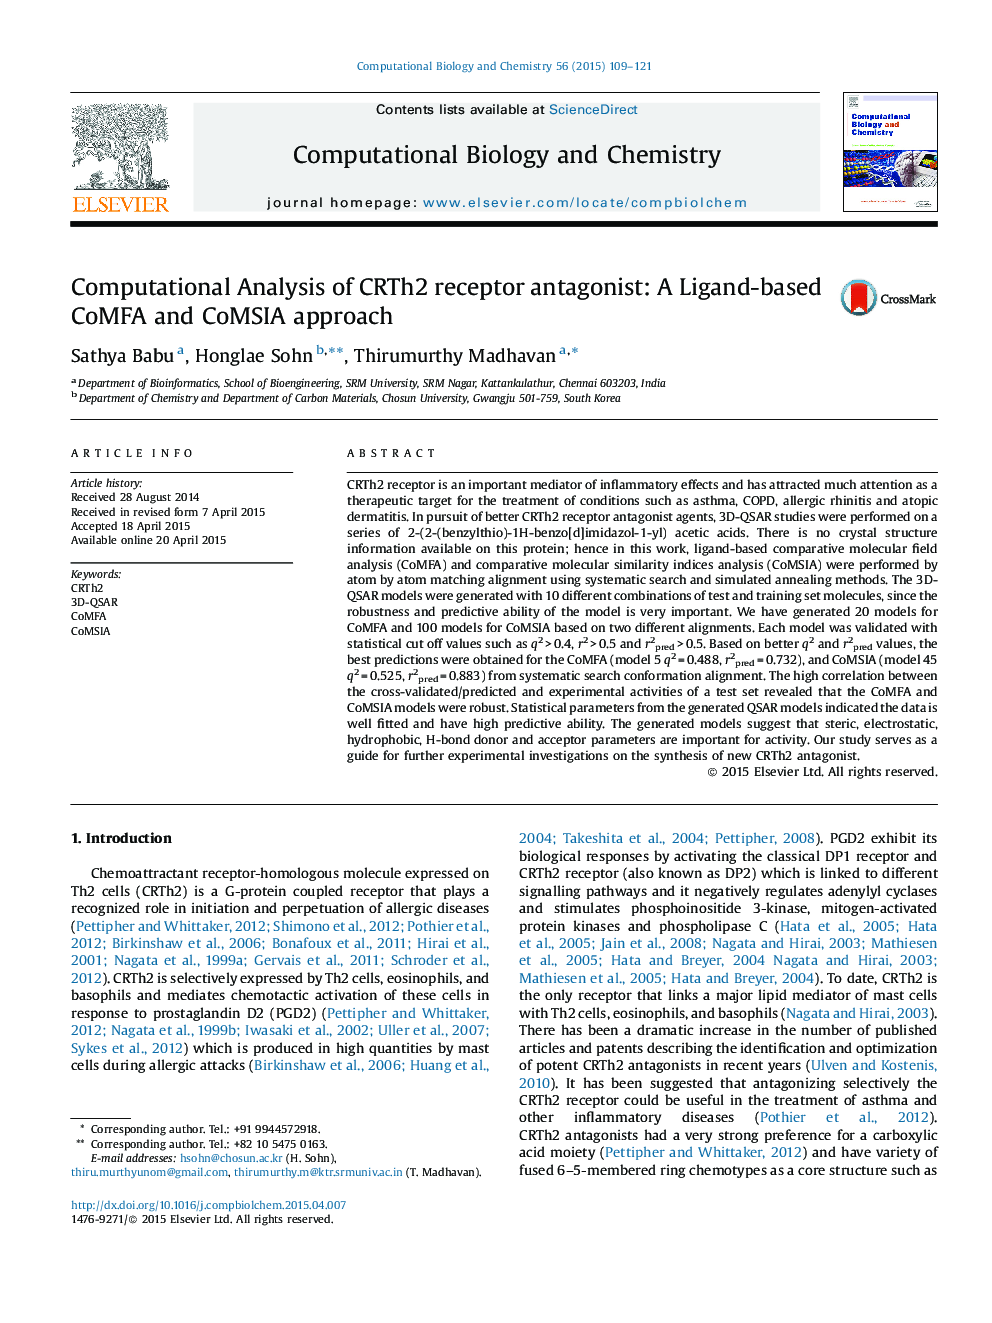 Computational Analysis of CRTh2 receptor antagonist: A Ligand-based CoMFA and CoMSIA approach